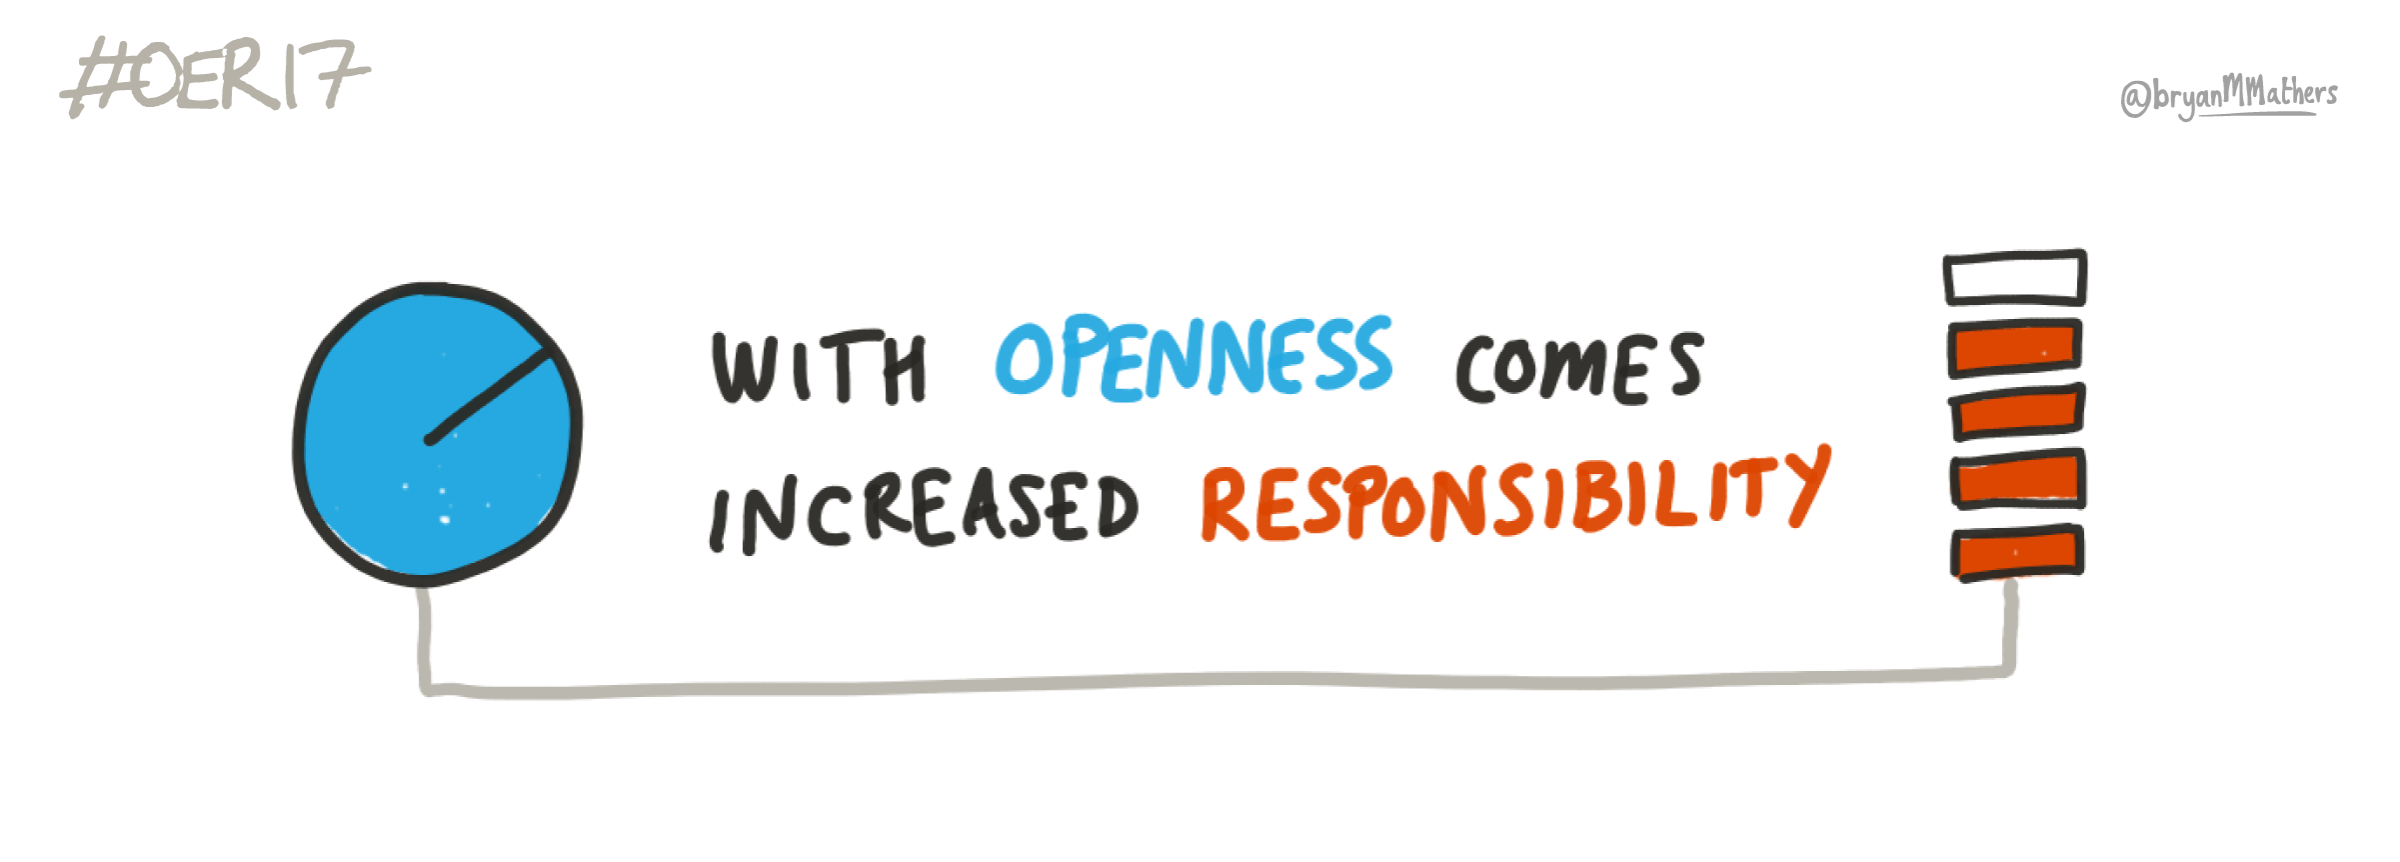 "With Openness comes increased responsibility" - sketch by Bryan M Mathers (@bryanMMathers), under a CC-BY 4.0 licence